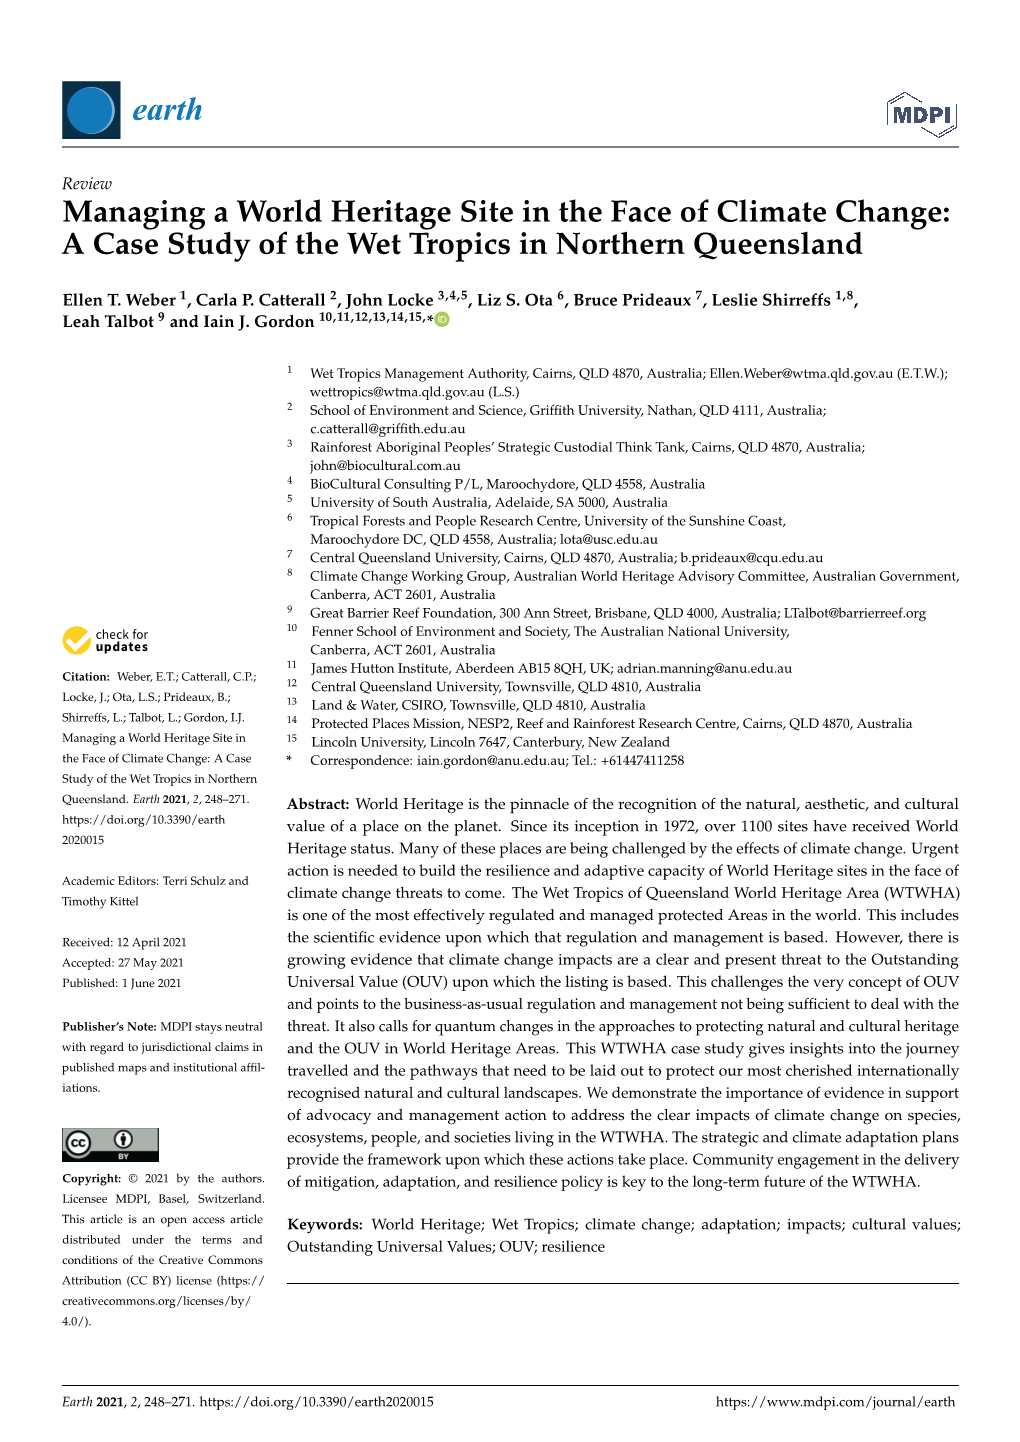 Managing a World Heritage Site in the Face of Climate Change: a Case Study of the Wet Tropics in Northern Queensland